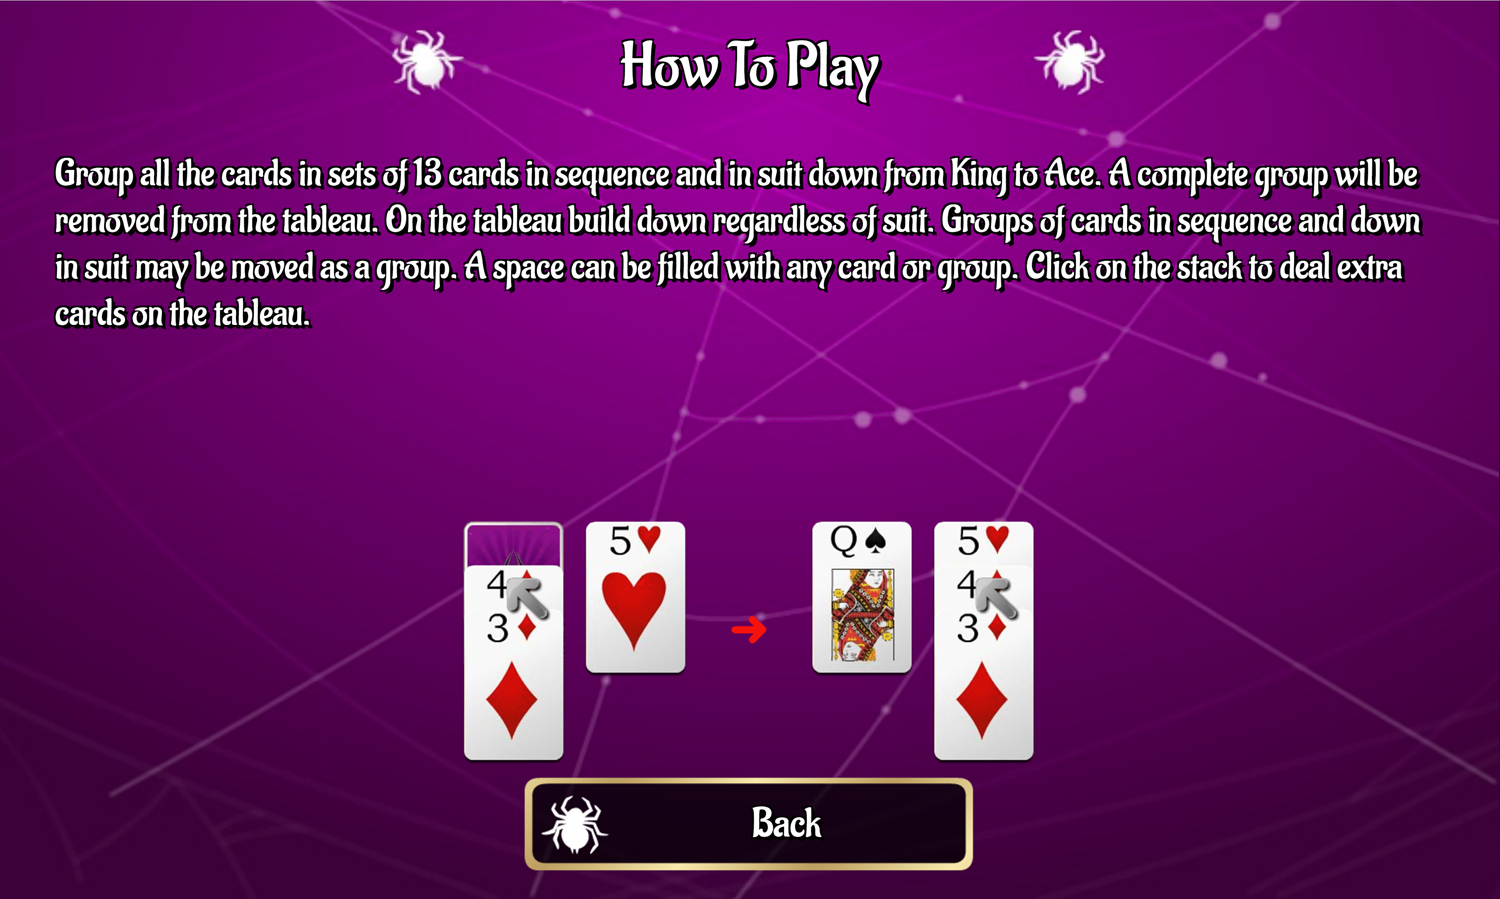 Huge Spider Solitaire Game How to Play Screen Screenshot.